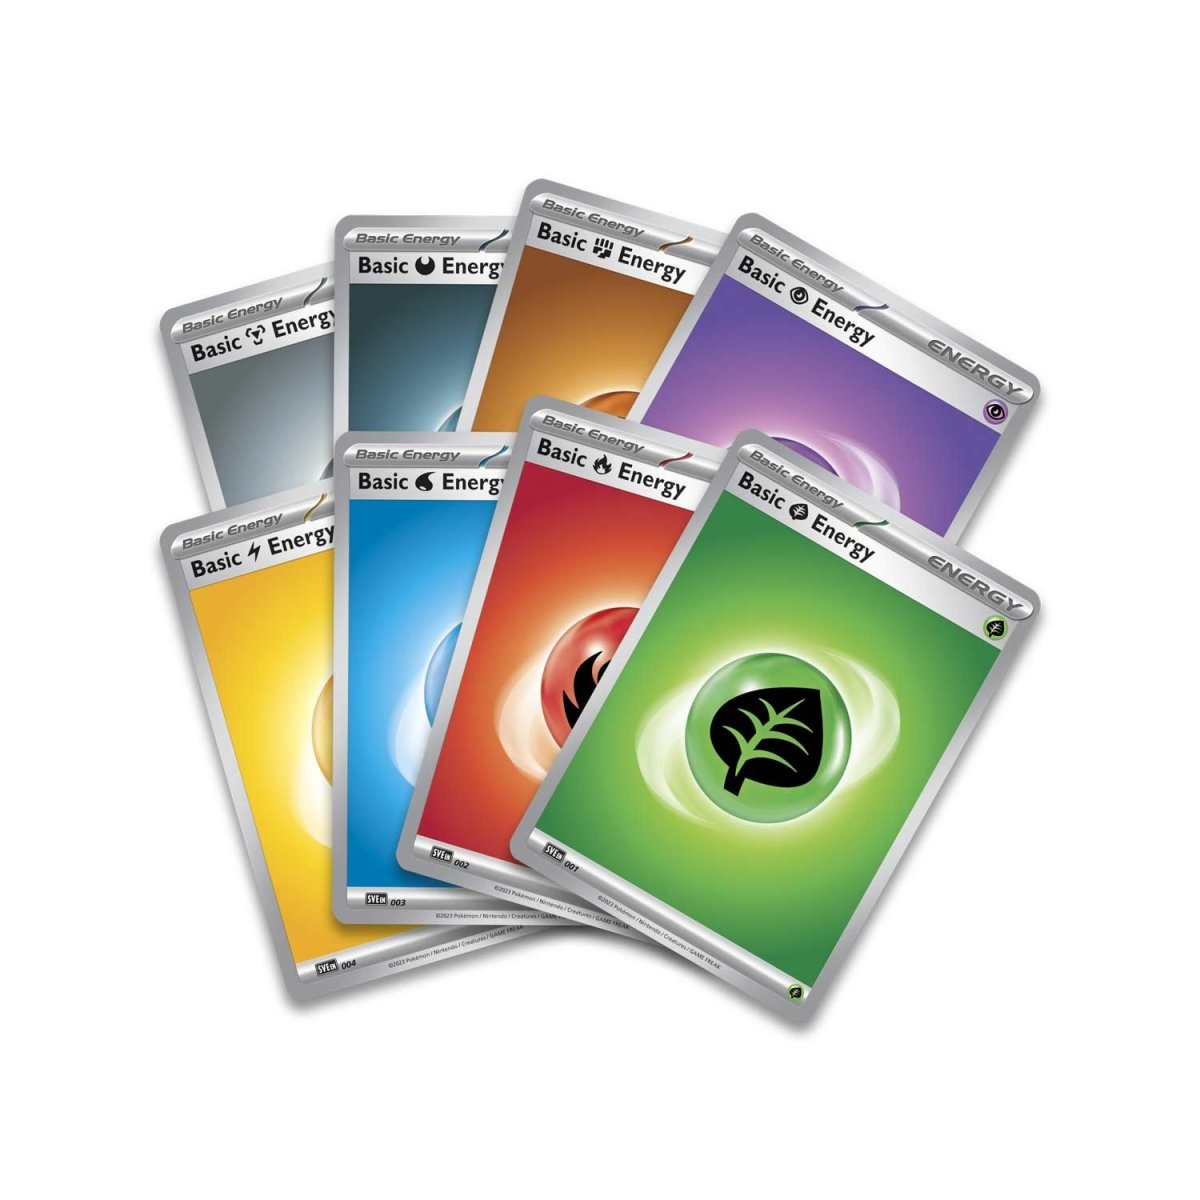 Basic energy cards are also included for your energy-hoarding pleasure.